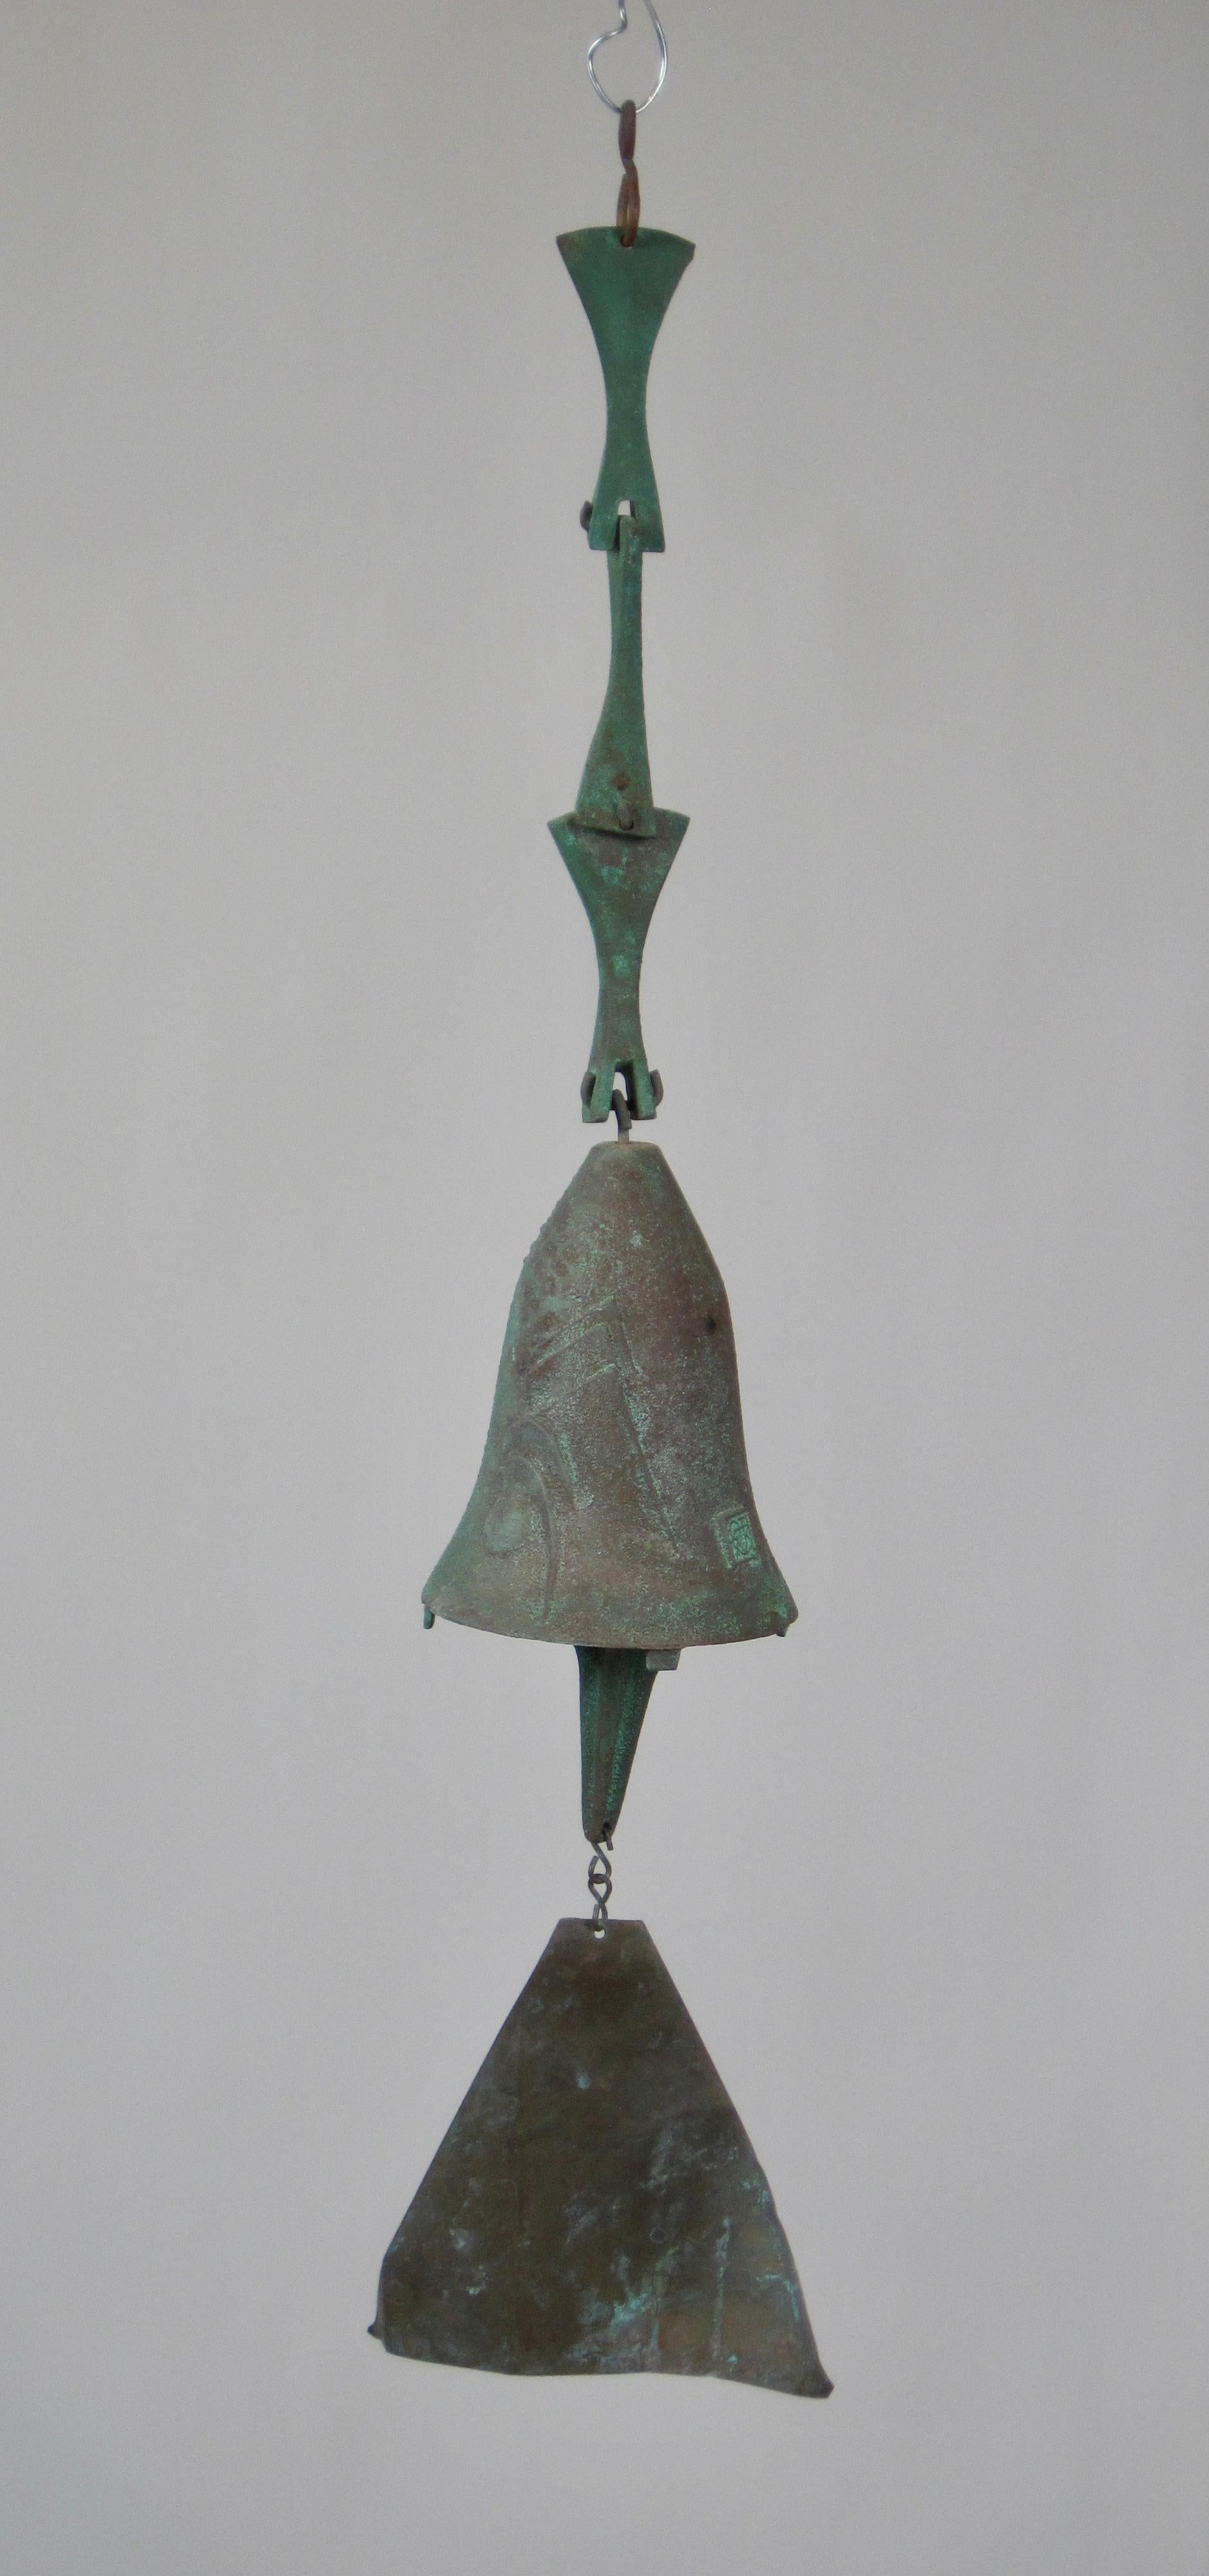 Cast bronze sculptural wind bell with great patina by artist, architect and visionary, Paolo Soleri. This piece was made at his Cosanti studio in Arizona by the artist who originally came to the US in 1947 to study under Frank Lloyd Wright. The